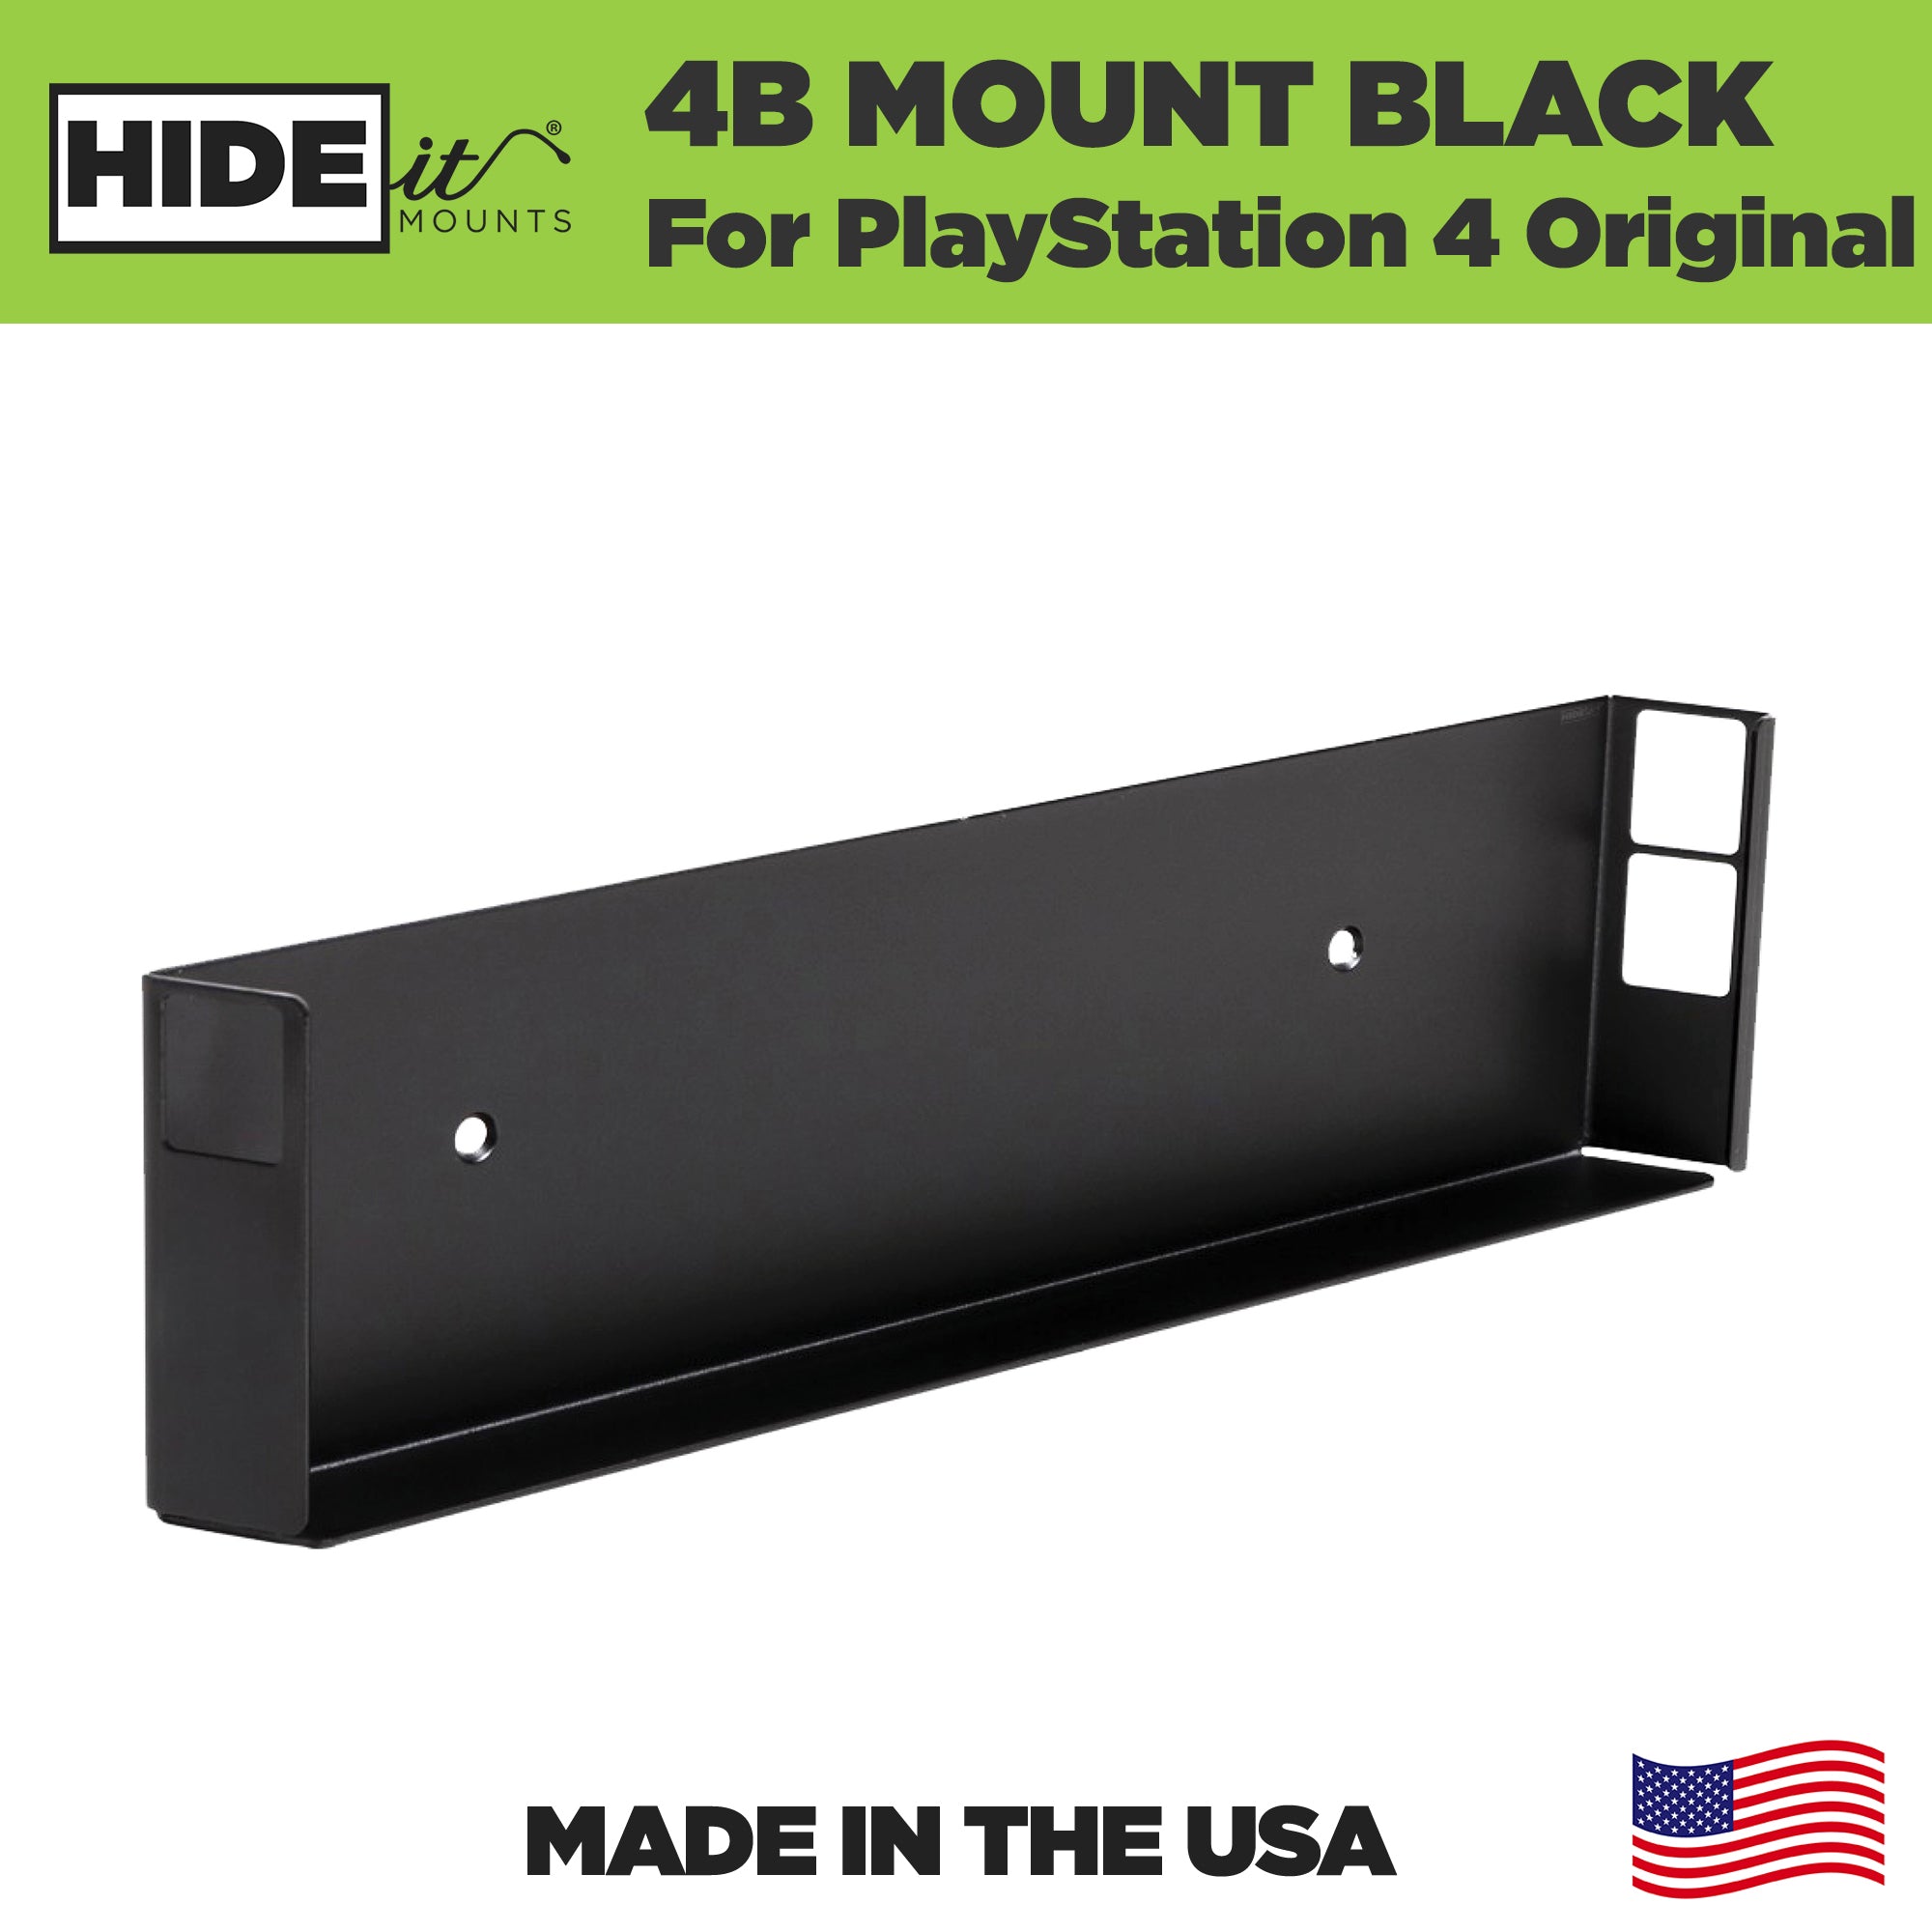 HIDEit Mounts PS4 Original Mount. This Sony PlayStation Original PS4 Wall Mount is Made in America by an American Company.